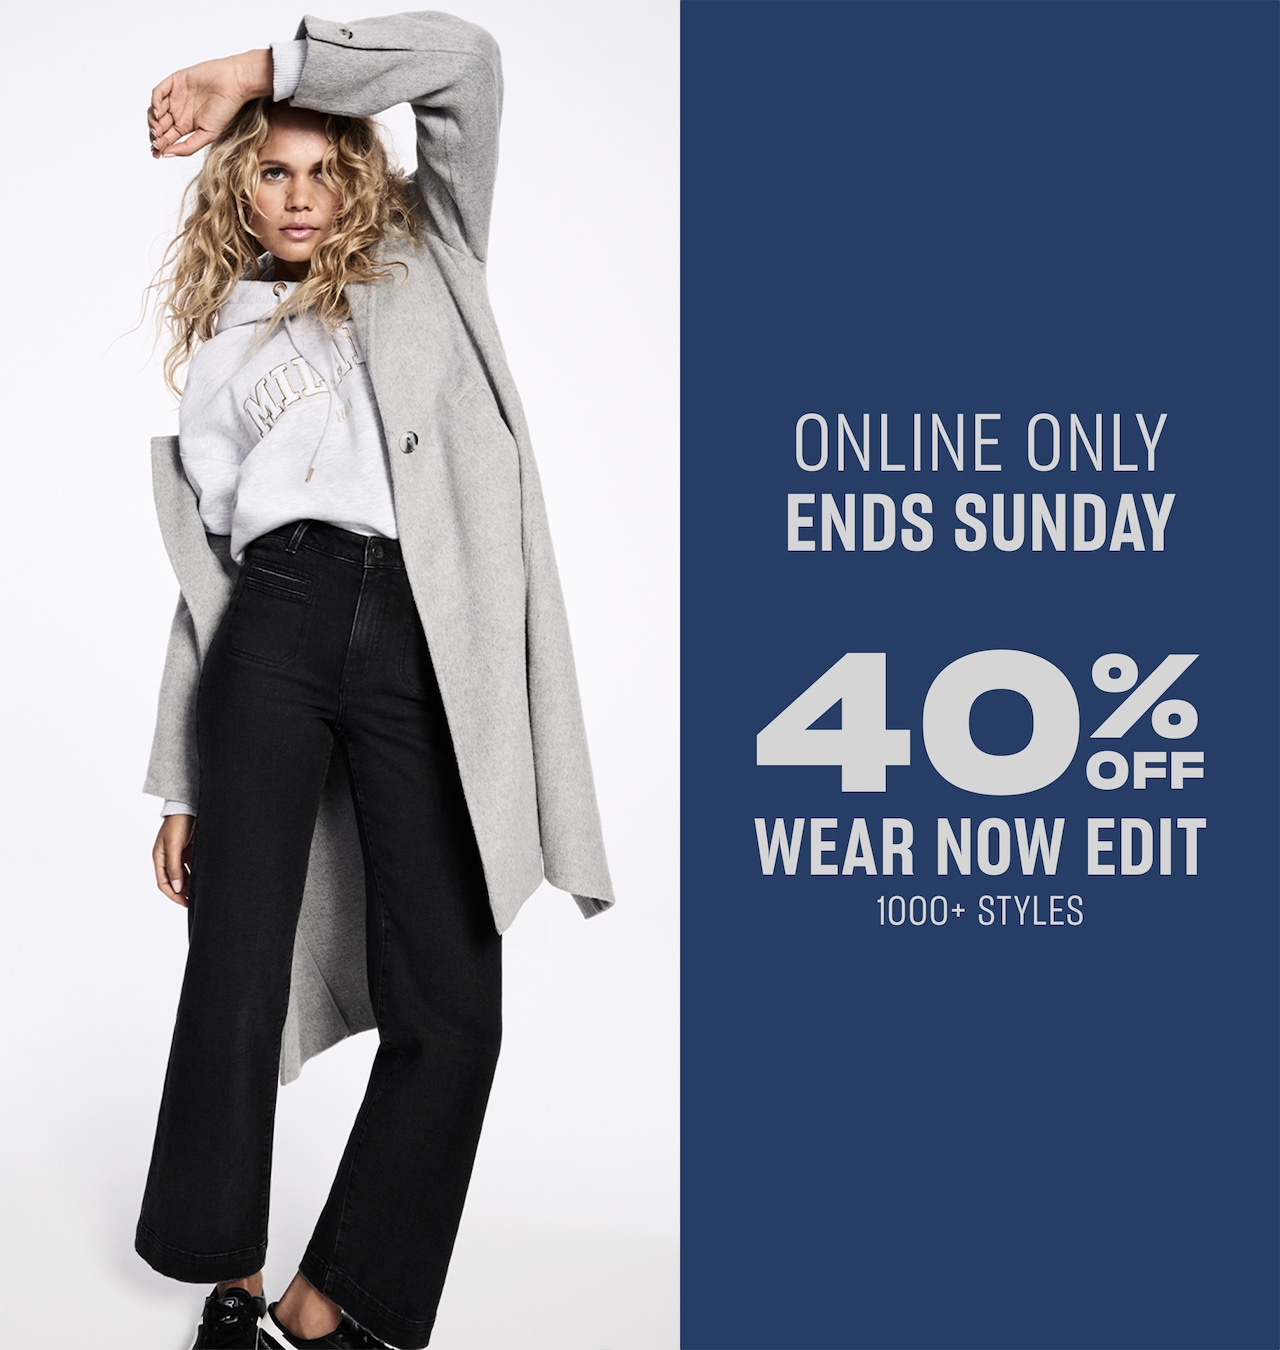 Online Only. Ends Sunday. 40% Off Wear Now Edit.